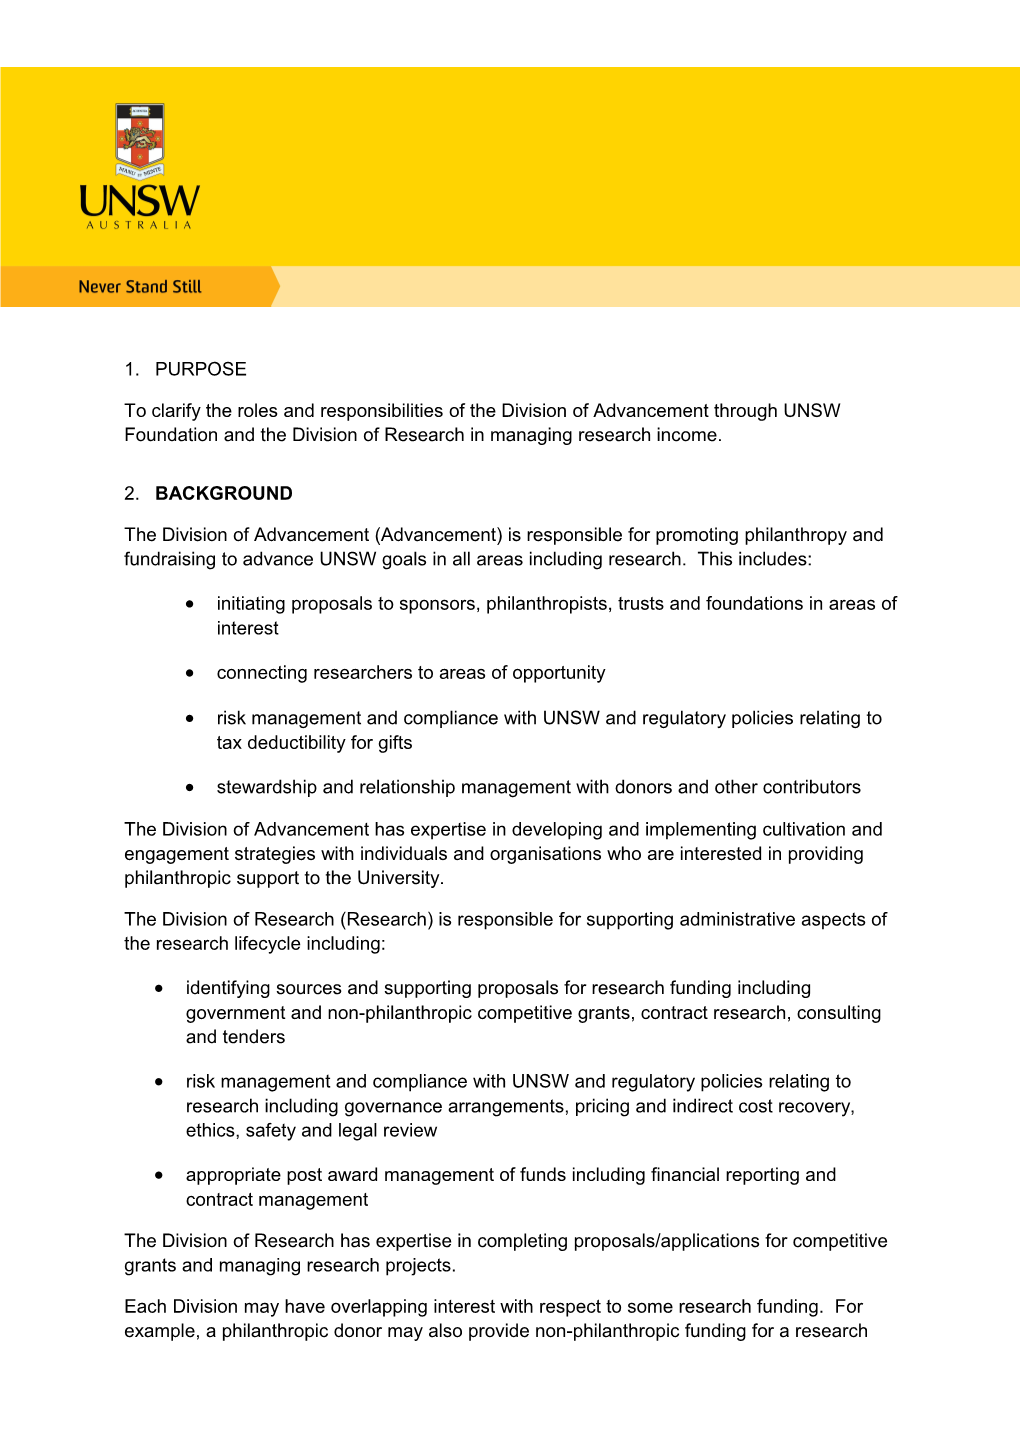 To Clarify the Roles and Responsibilities of the Division of Advancement Through UNSW Foundation